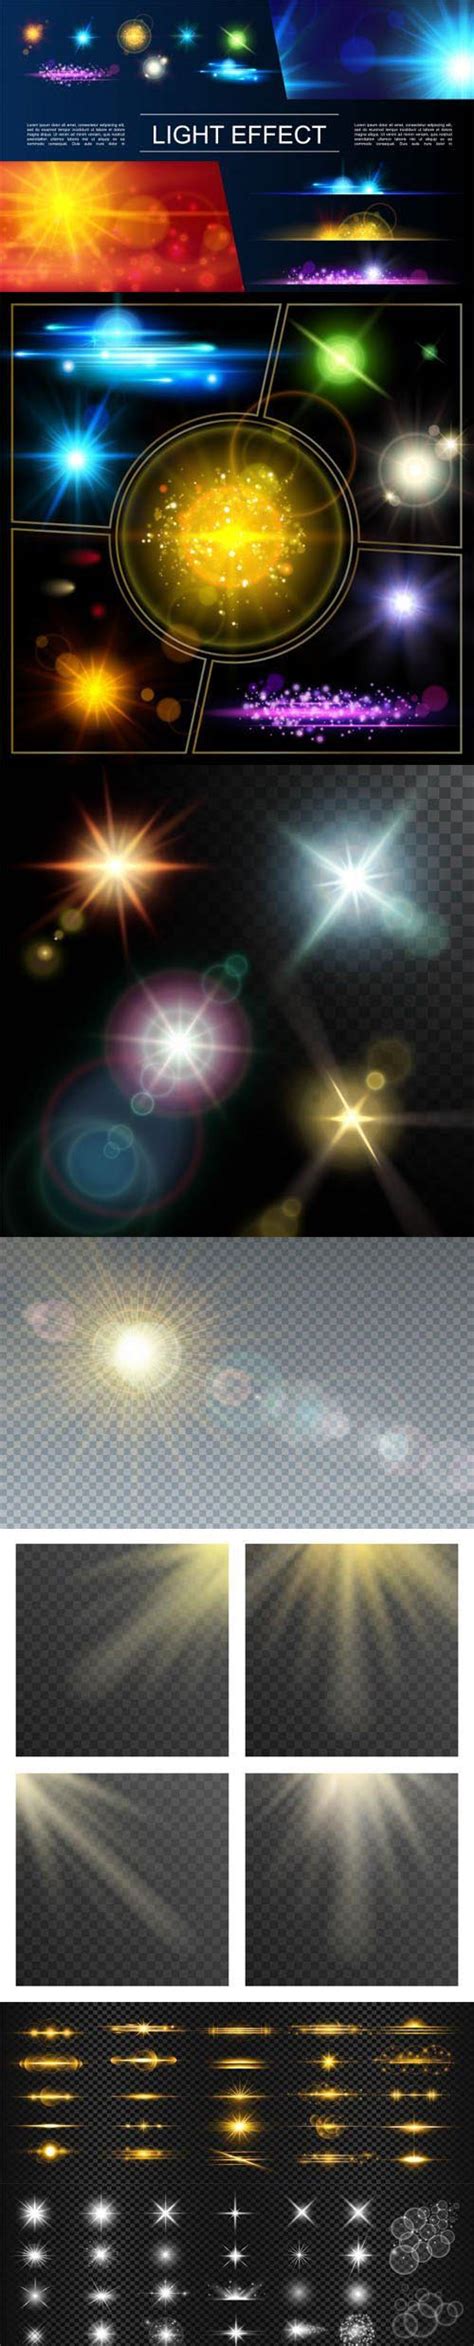 8 Realistic Light Effects Vector Templates Daz3d And Poses Stuffs